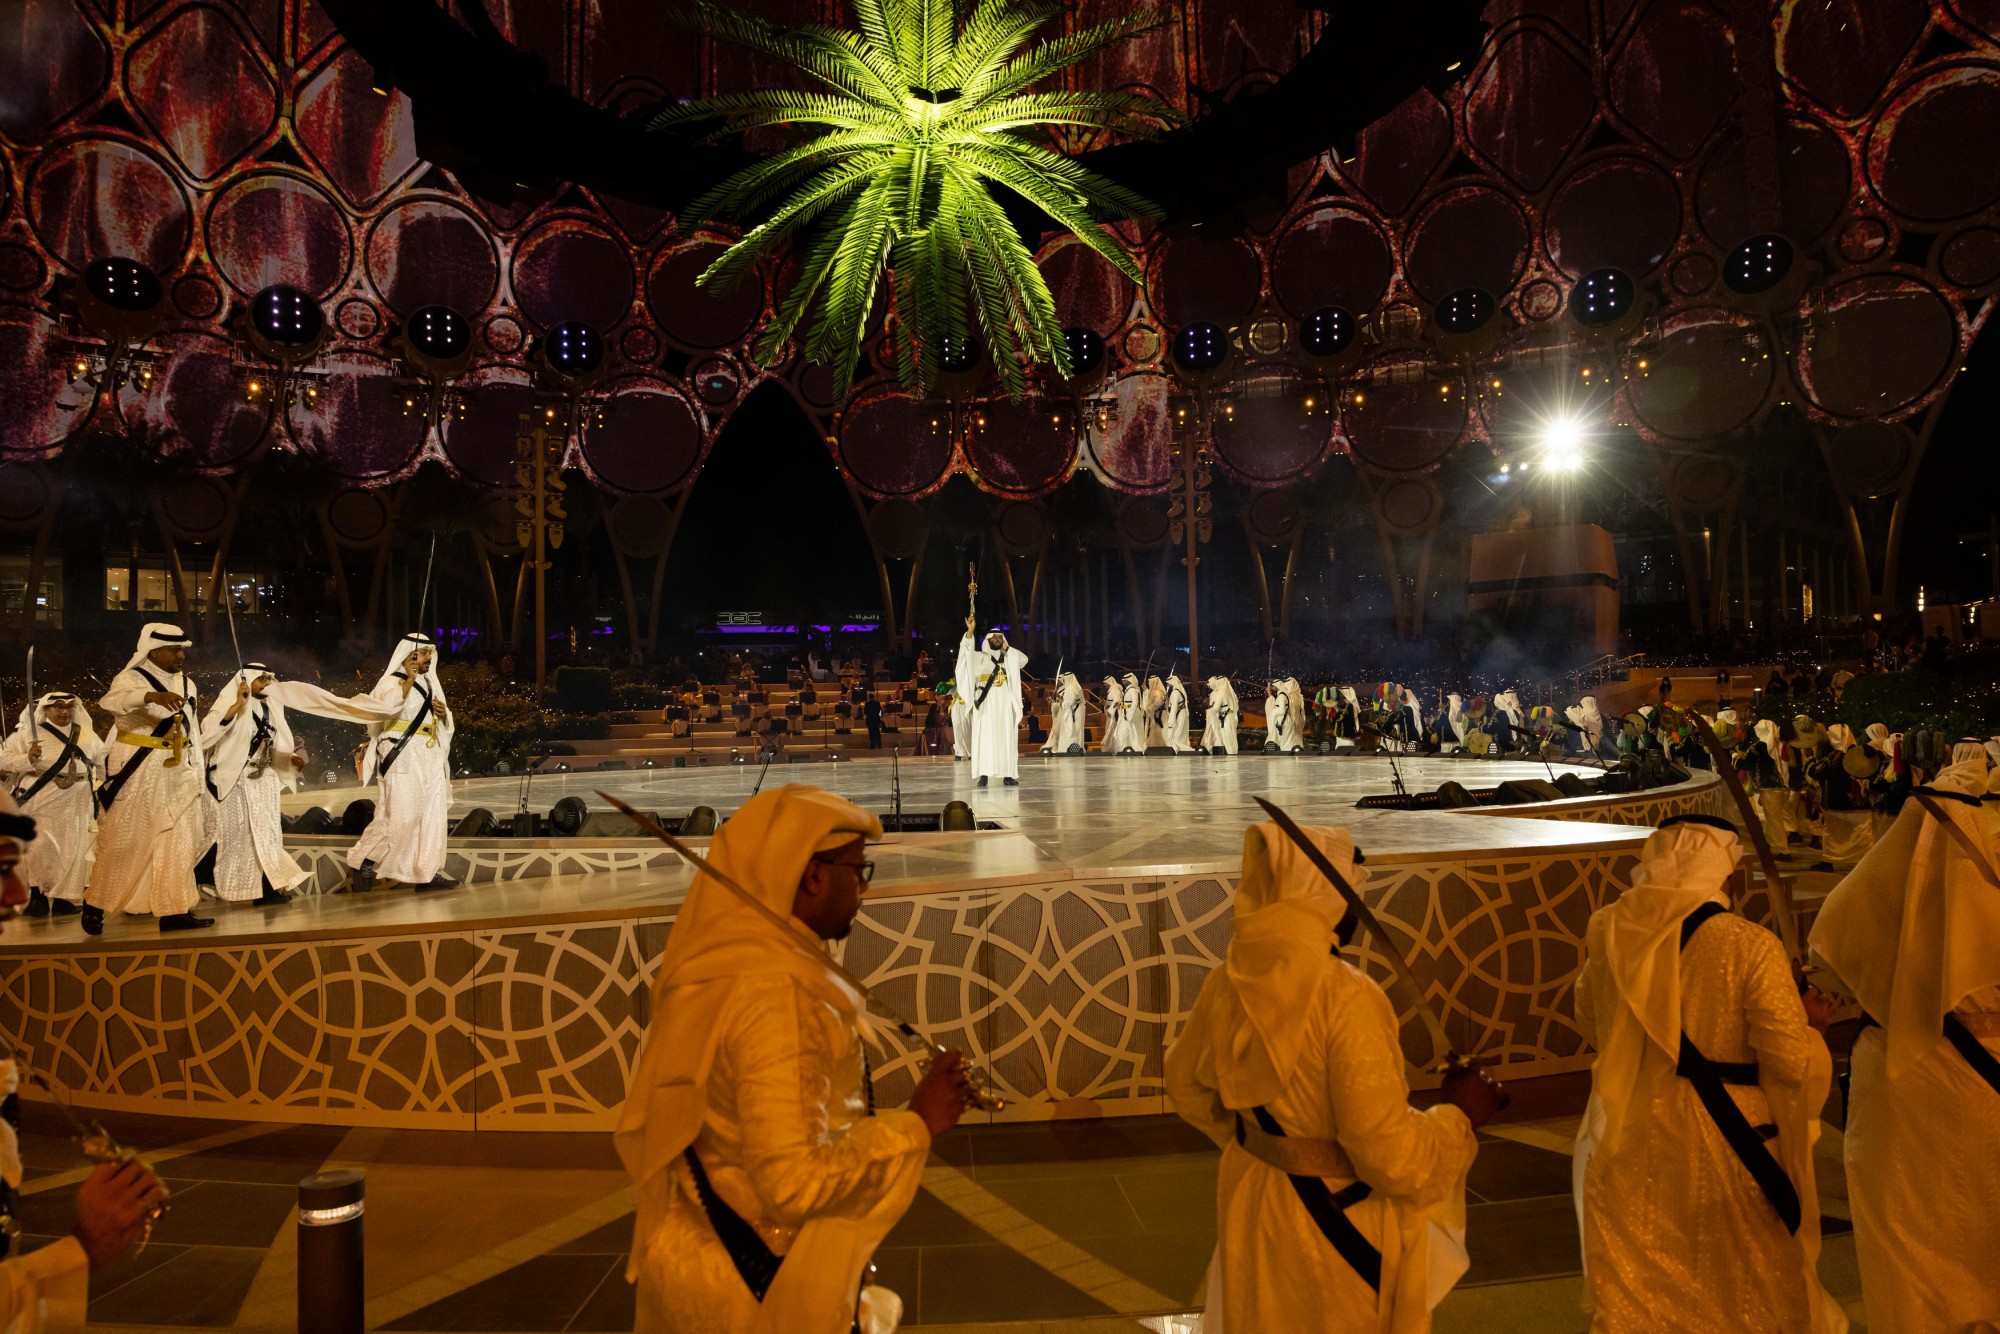 The Glory Musical Show at Al Wasl during the Kingdom of Saudi Arabia National Day m30465